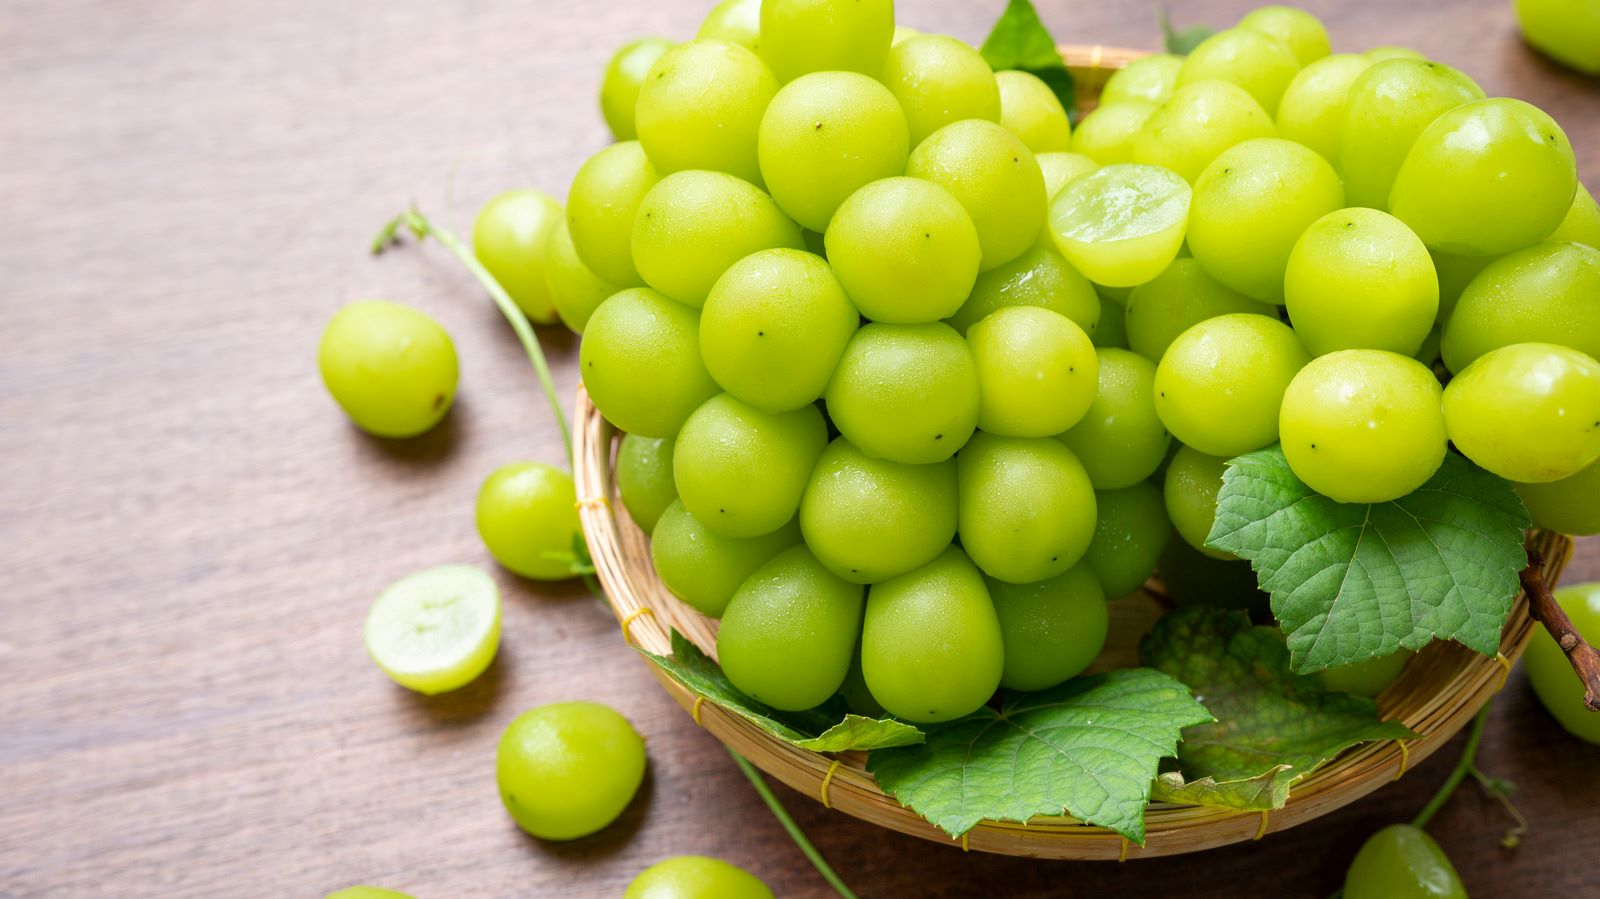 How To Store Green Grapes